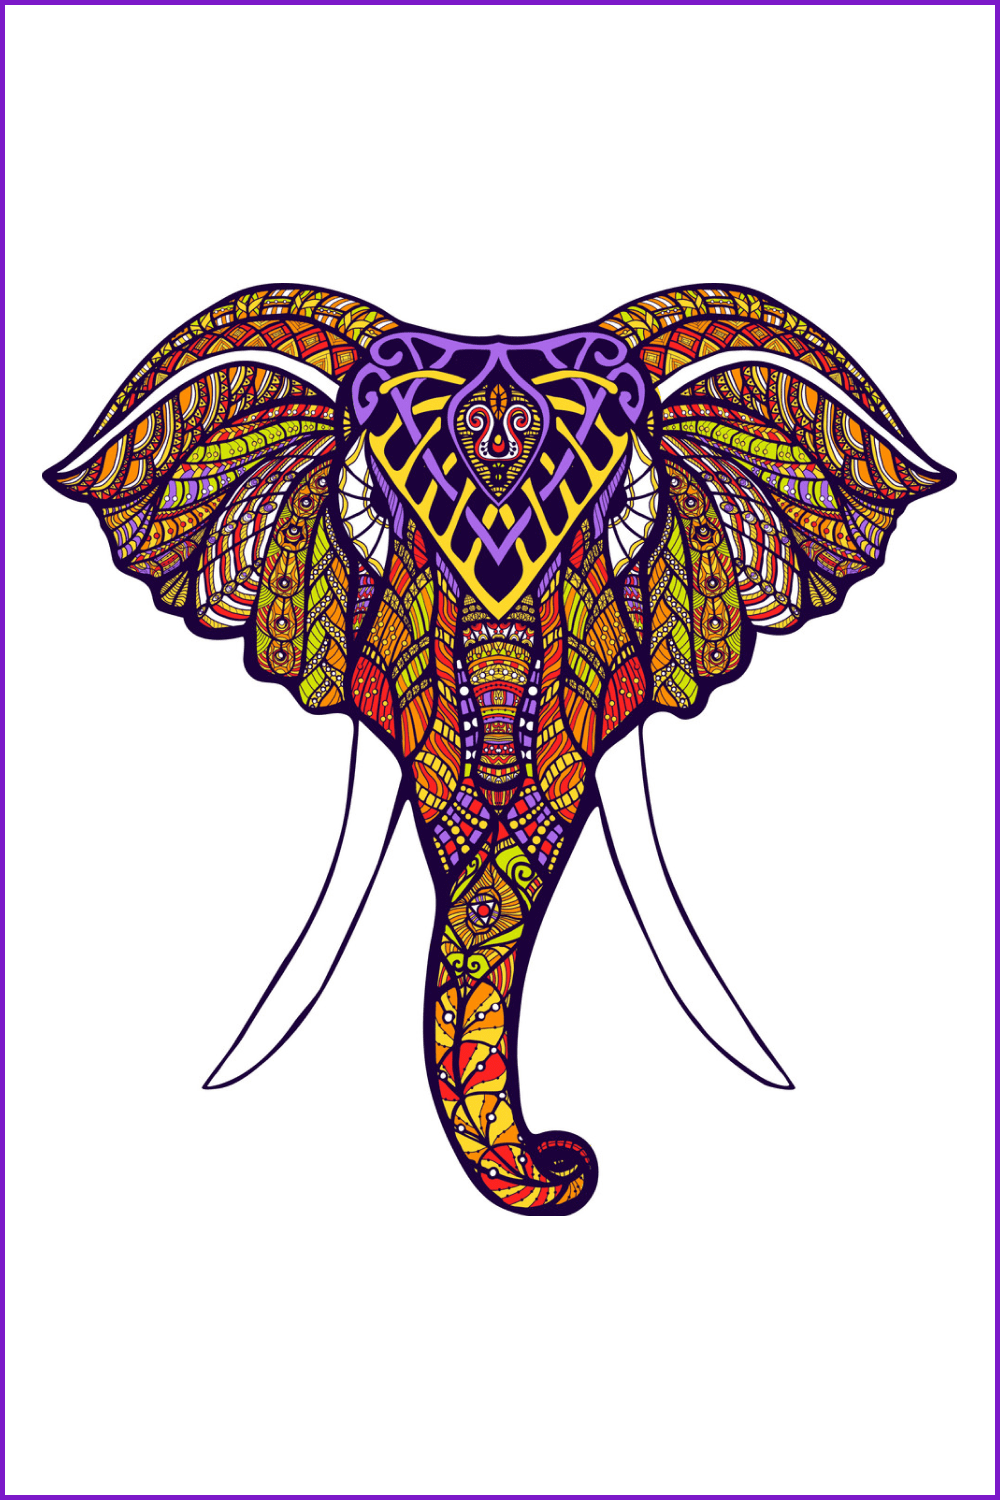 Colored elephant, which is painted with mandala elements.